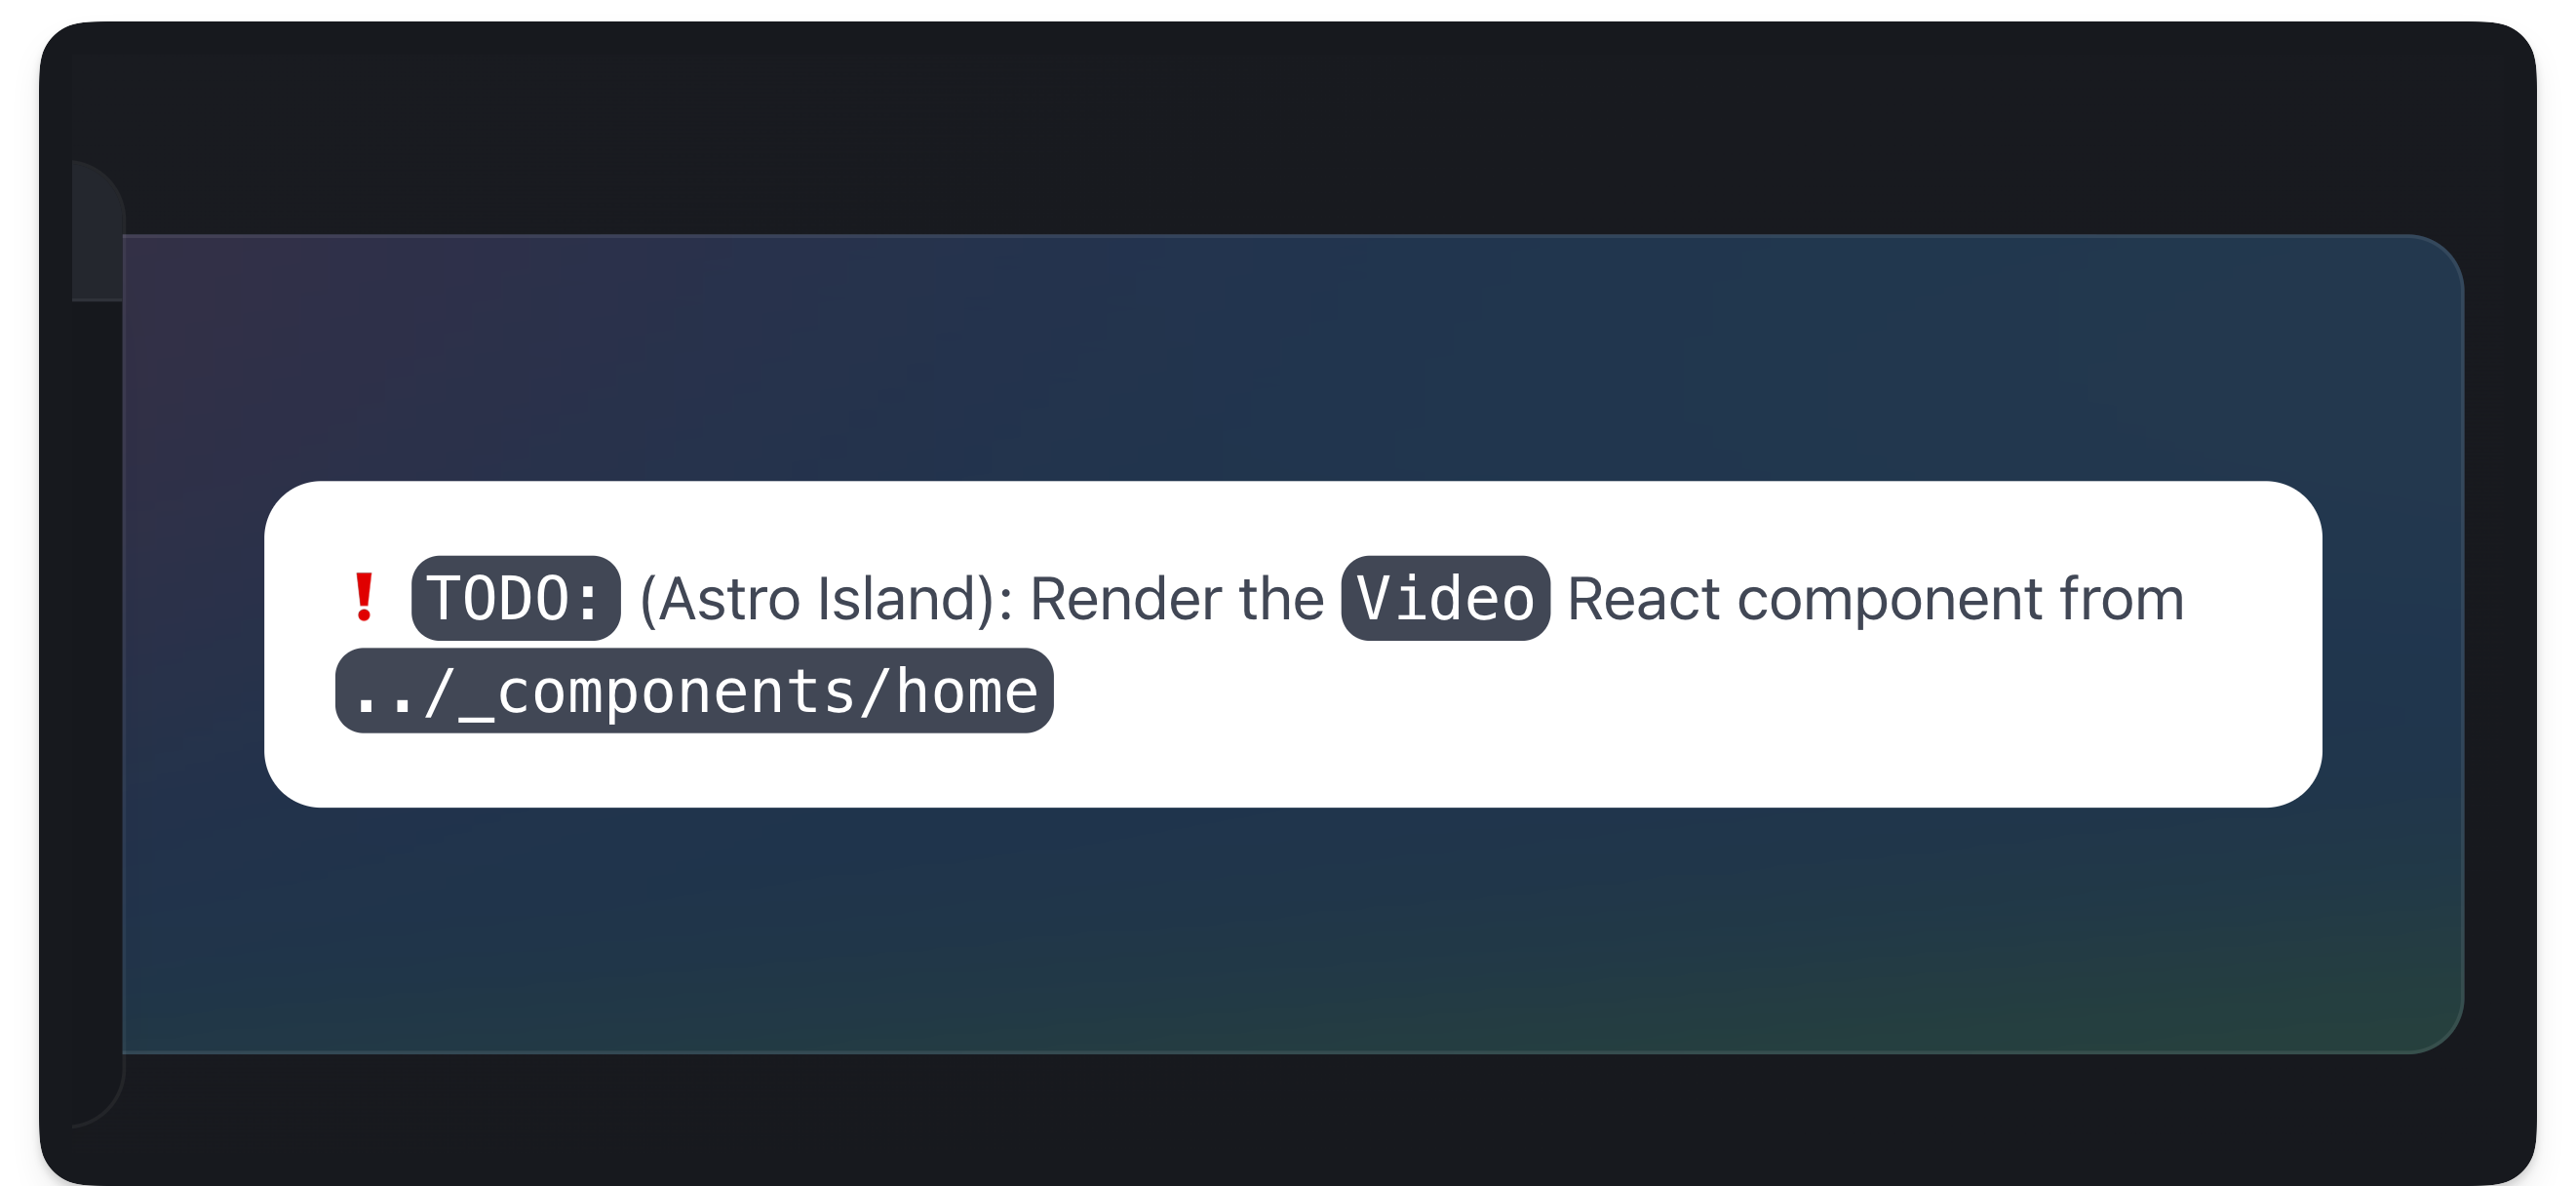 TODO: Render the Video React component island